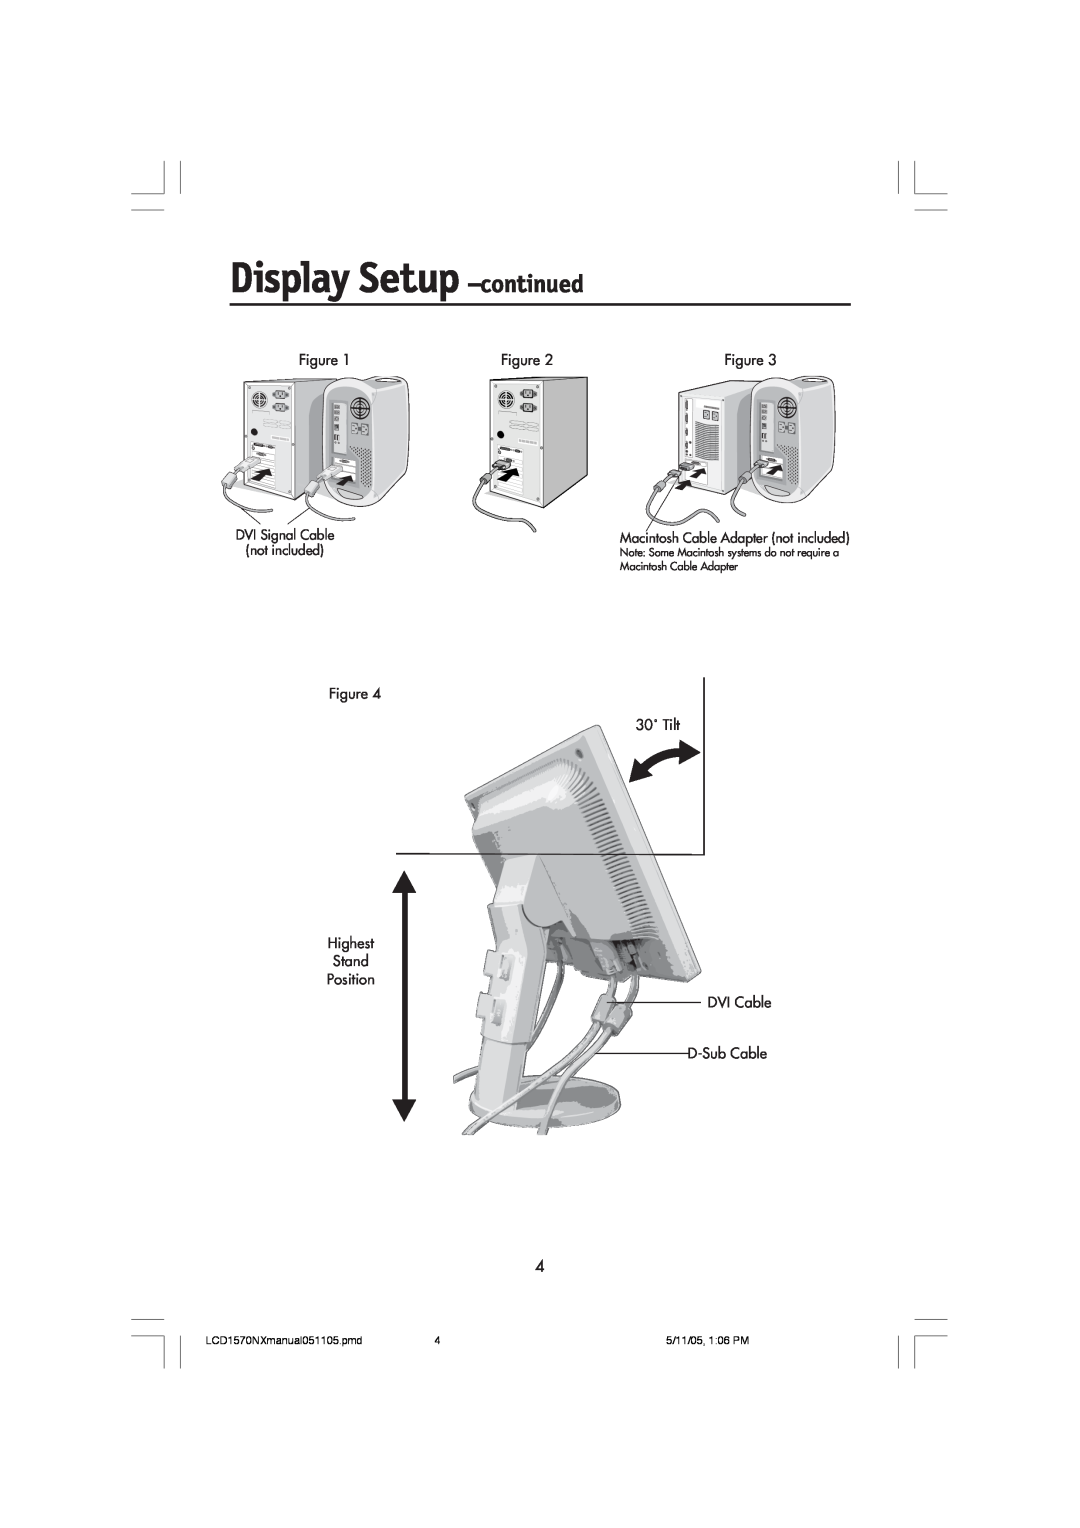 NEC Display Setup -continued, 30˚ Tilt Highest Stand Position DVI Cable D-Sub Cable, LCD1570NXmanual051105.pmd 